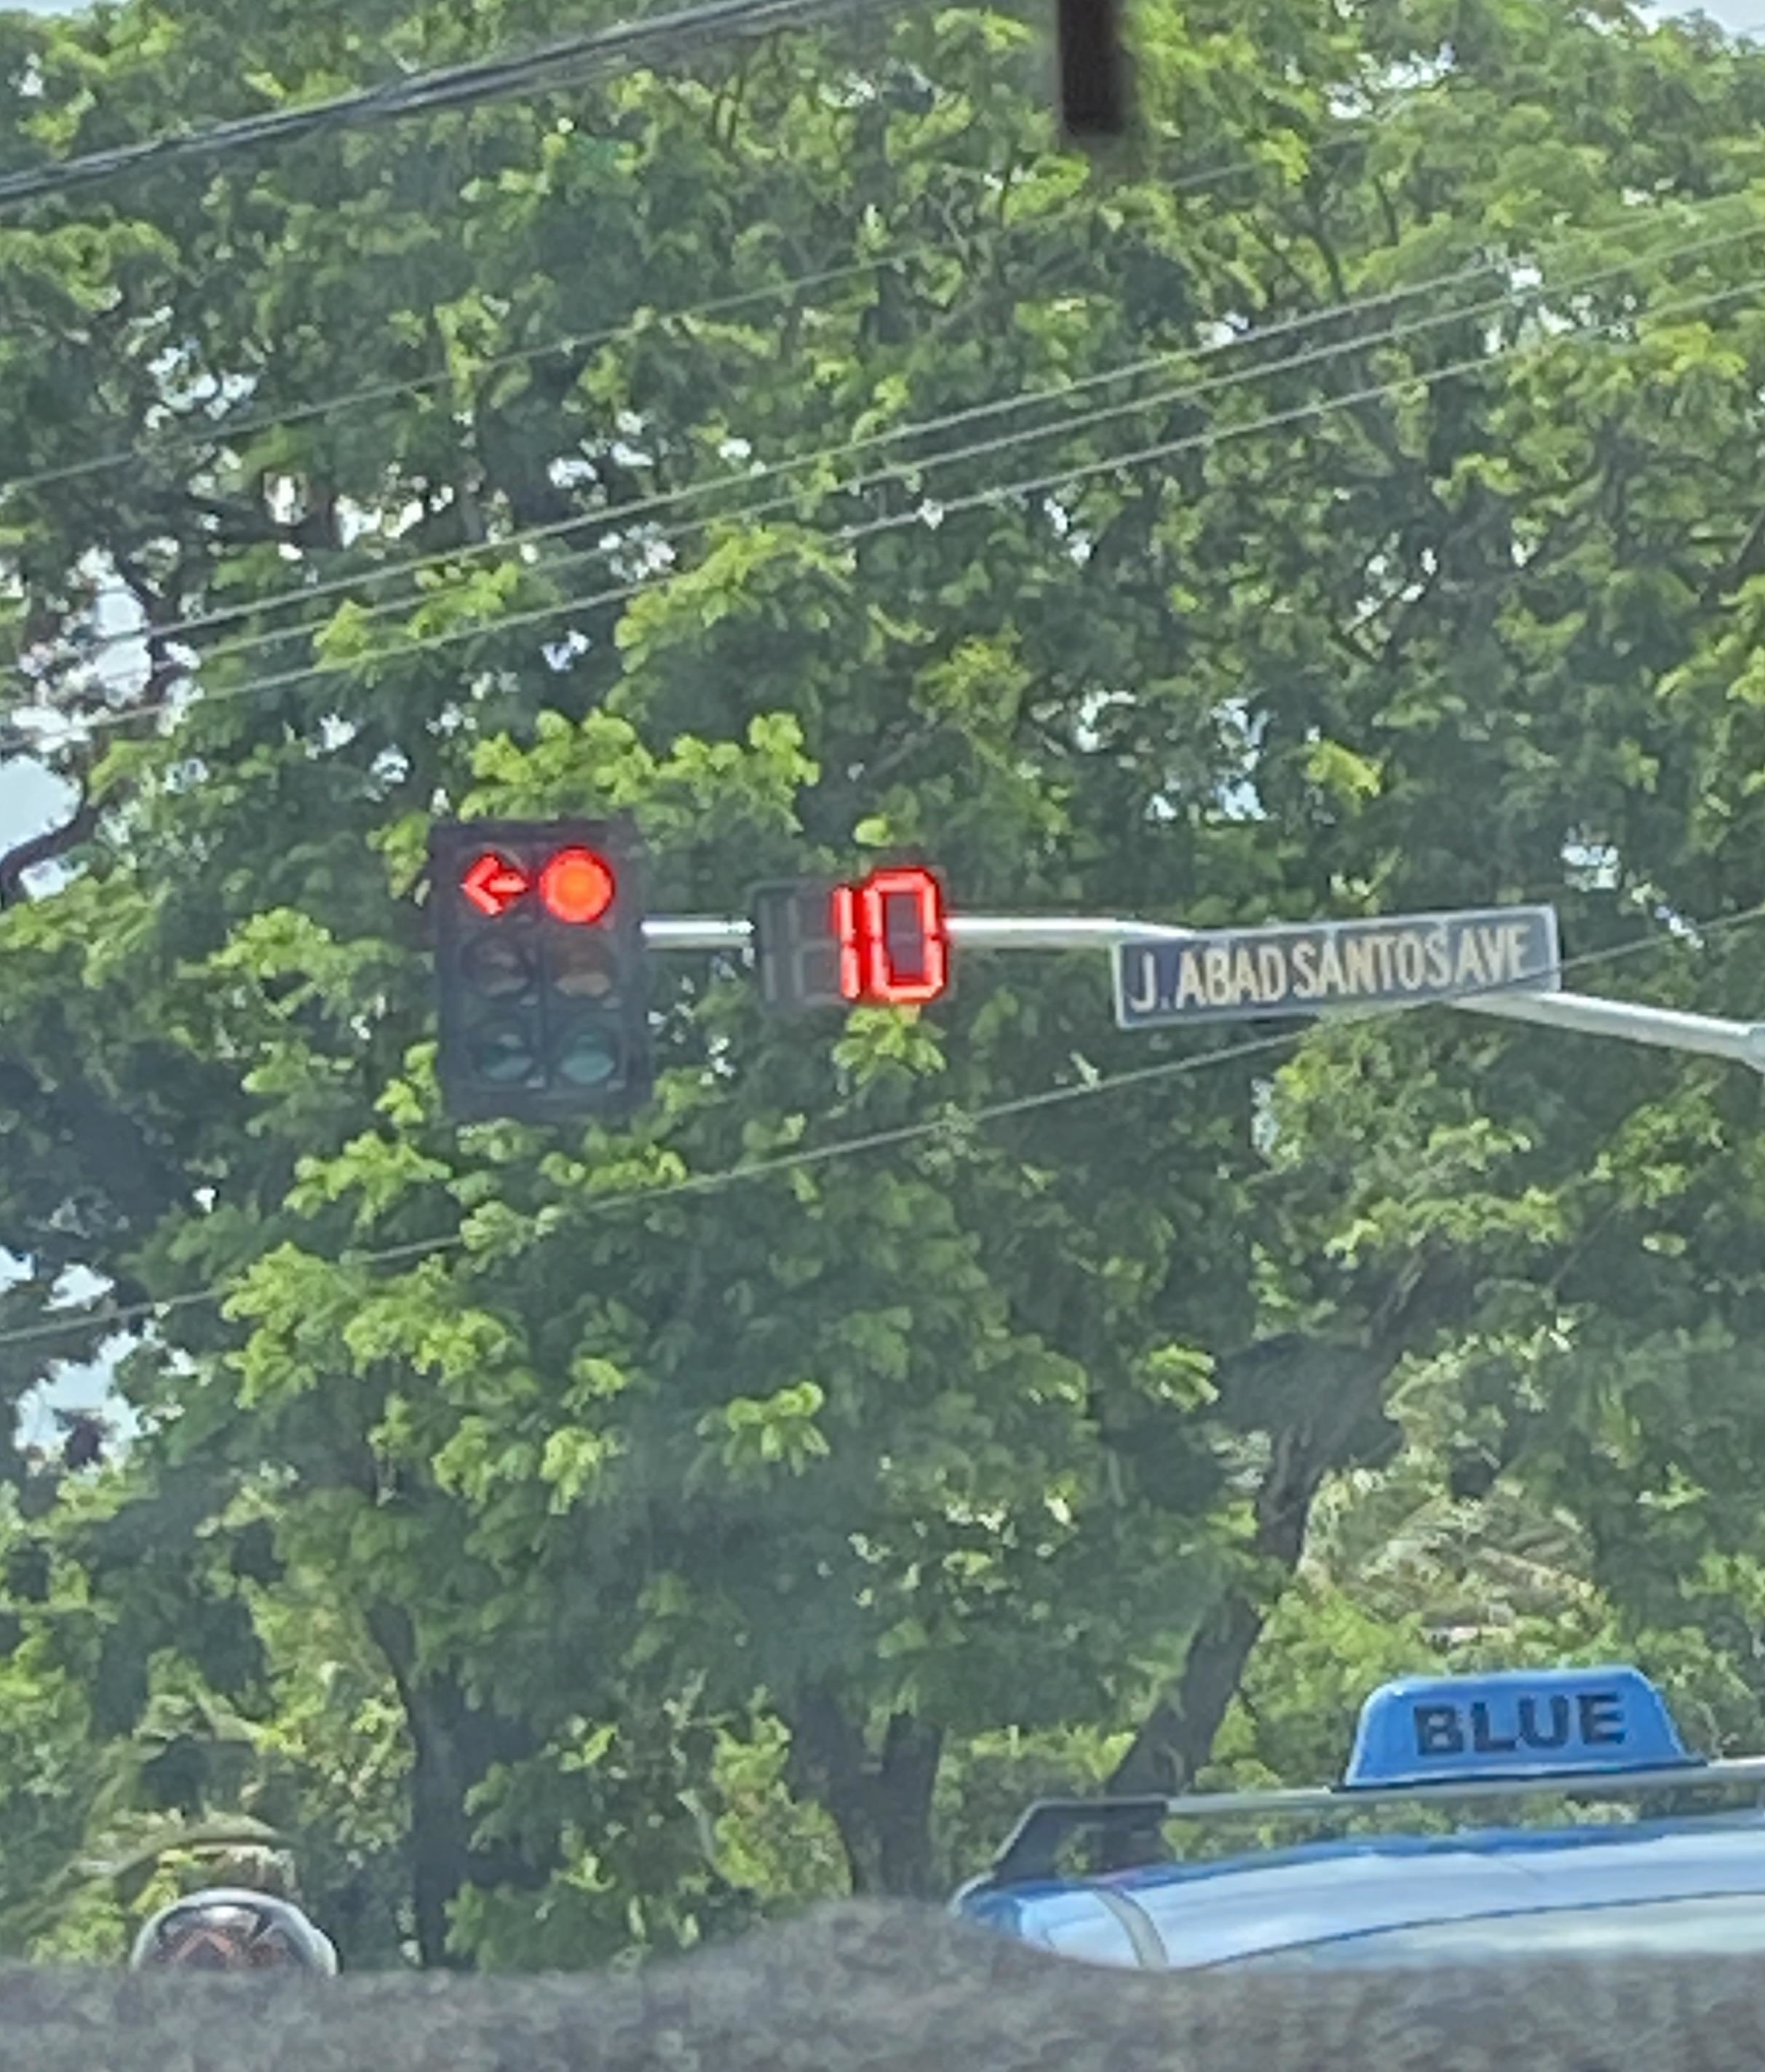 Red traffic light with a timer showing ten seconds at J. Abad Santos Avenue, framed by greenery